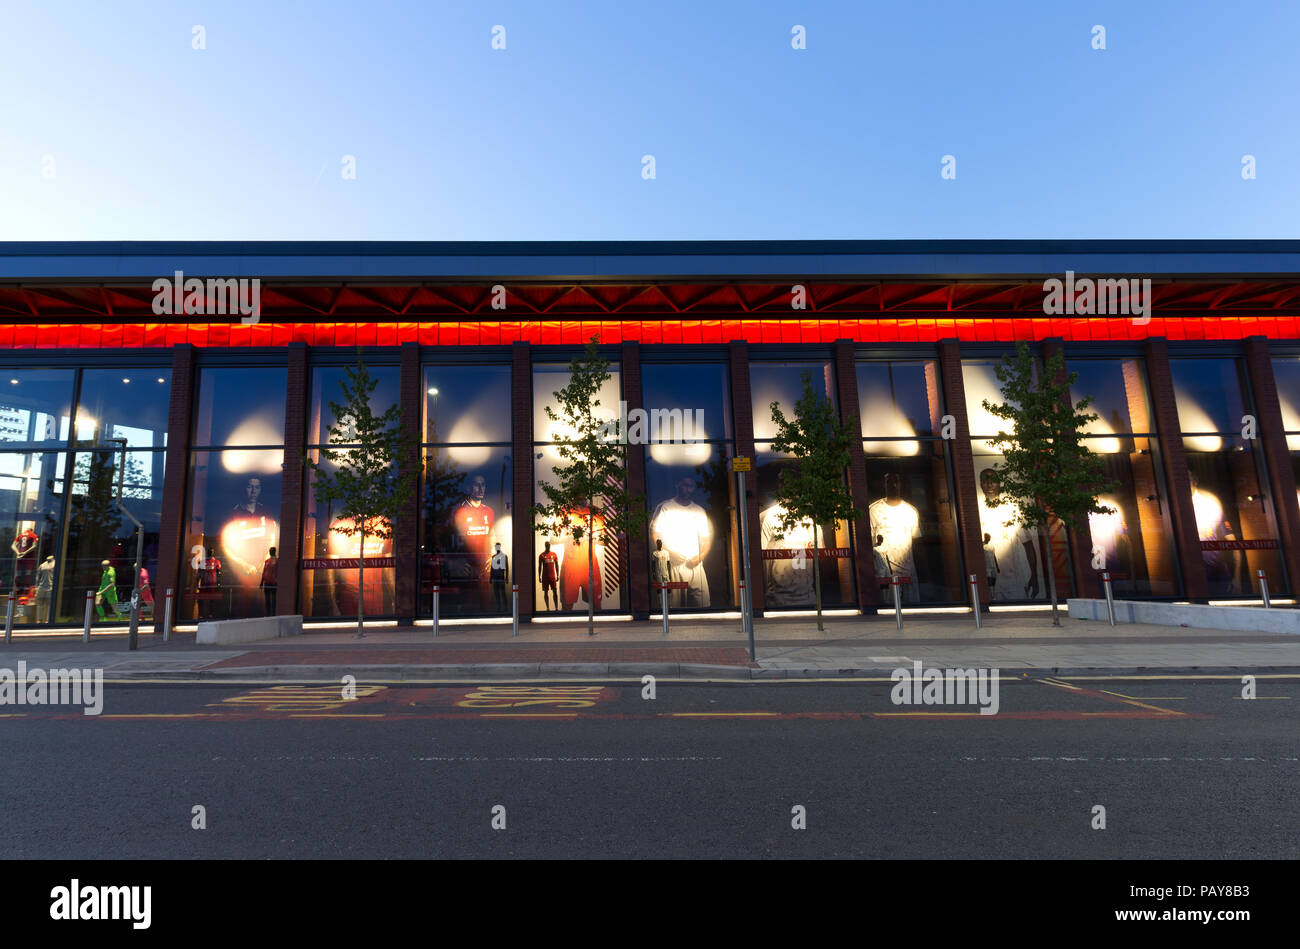 Liverpool Football Clubs stunning new mega store opened in 2018 forms part of the clubs regeneration of the Anfield stadium. Stock Photo